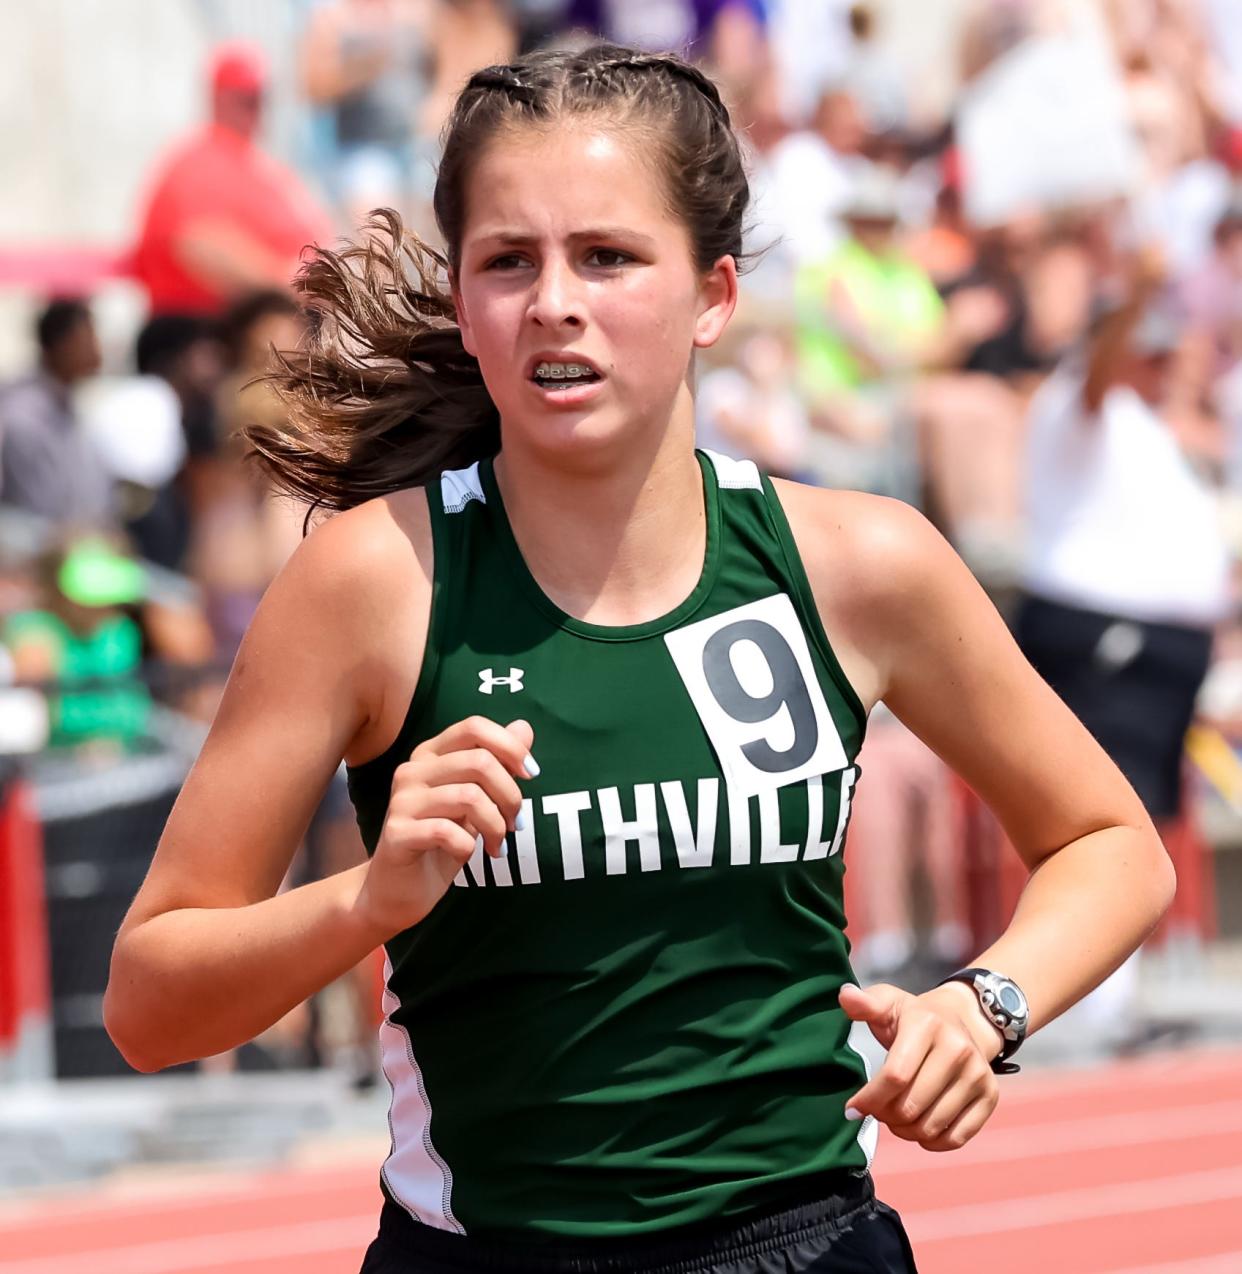 Smithville standout Kaitlyn Carr finished sixth with a time of 11:18.15 in the 3200 to earn All-Ohio.